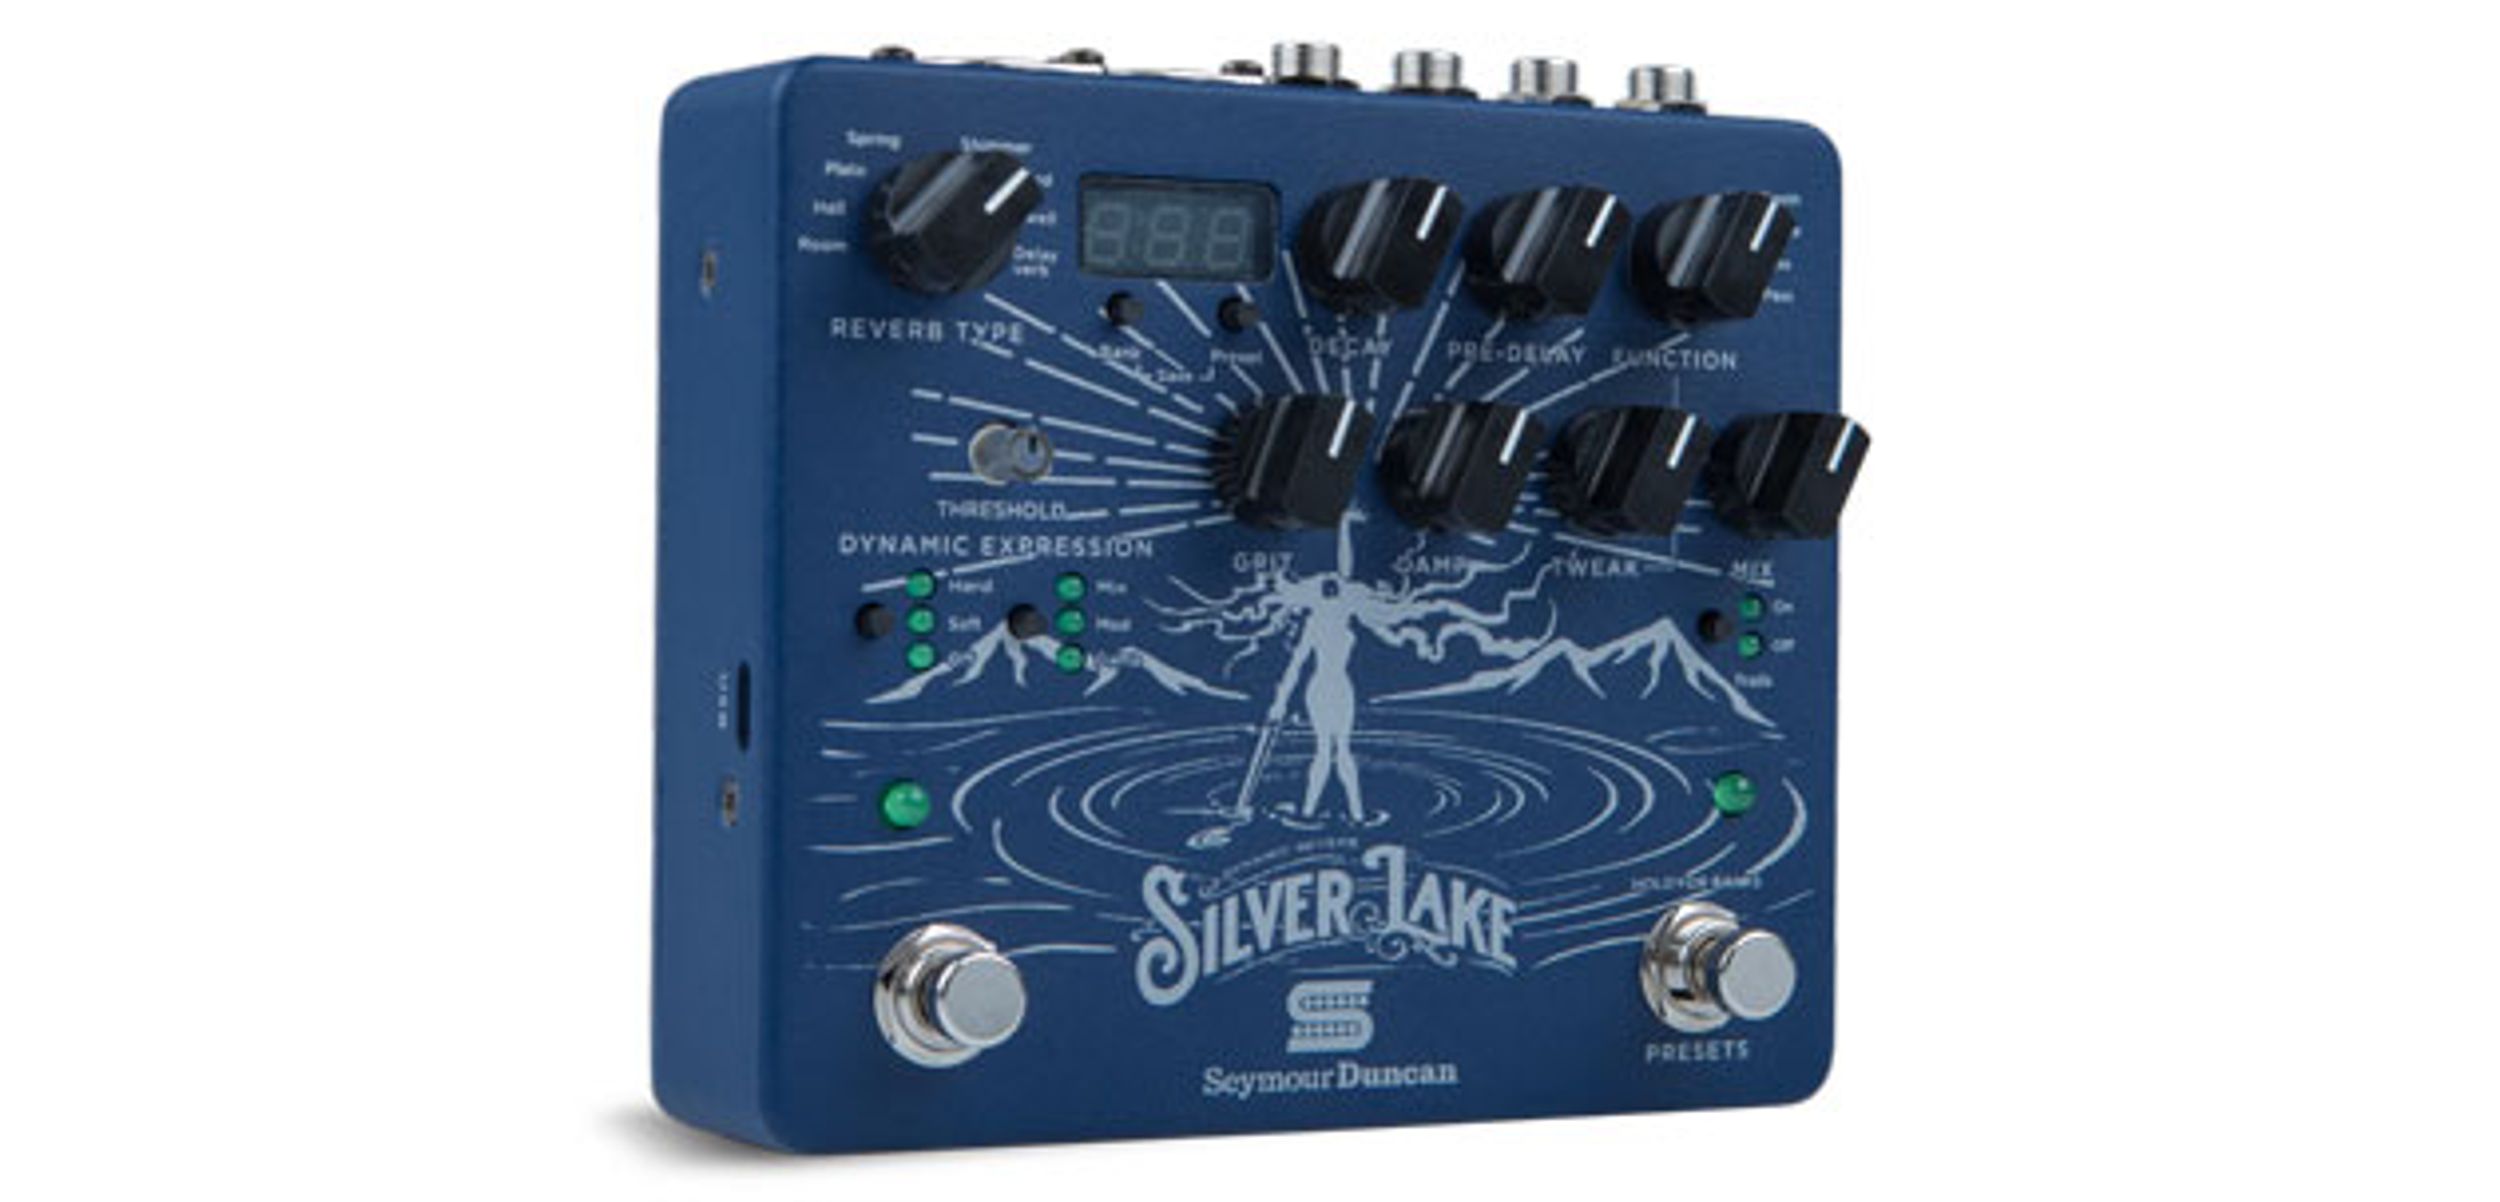 Seymour Duncan Releases the Silver Lake Reverb